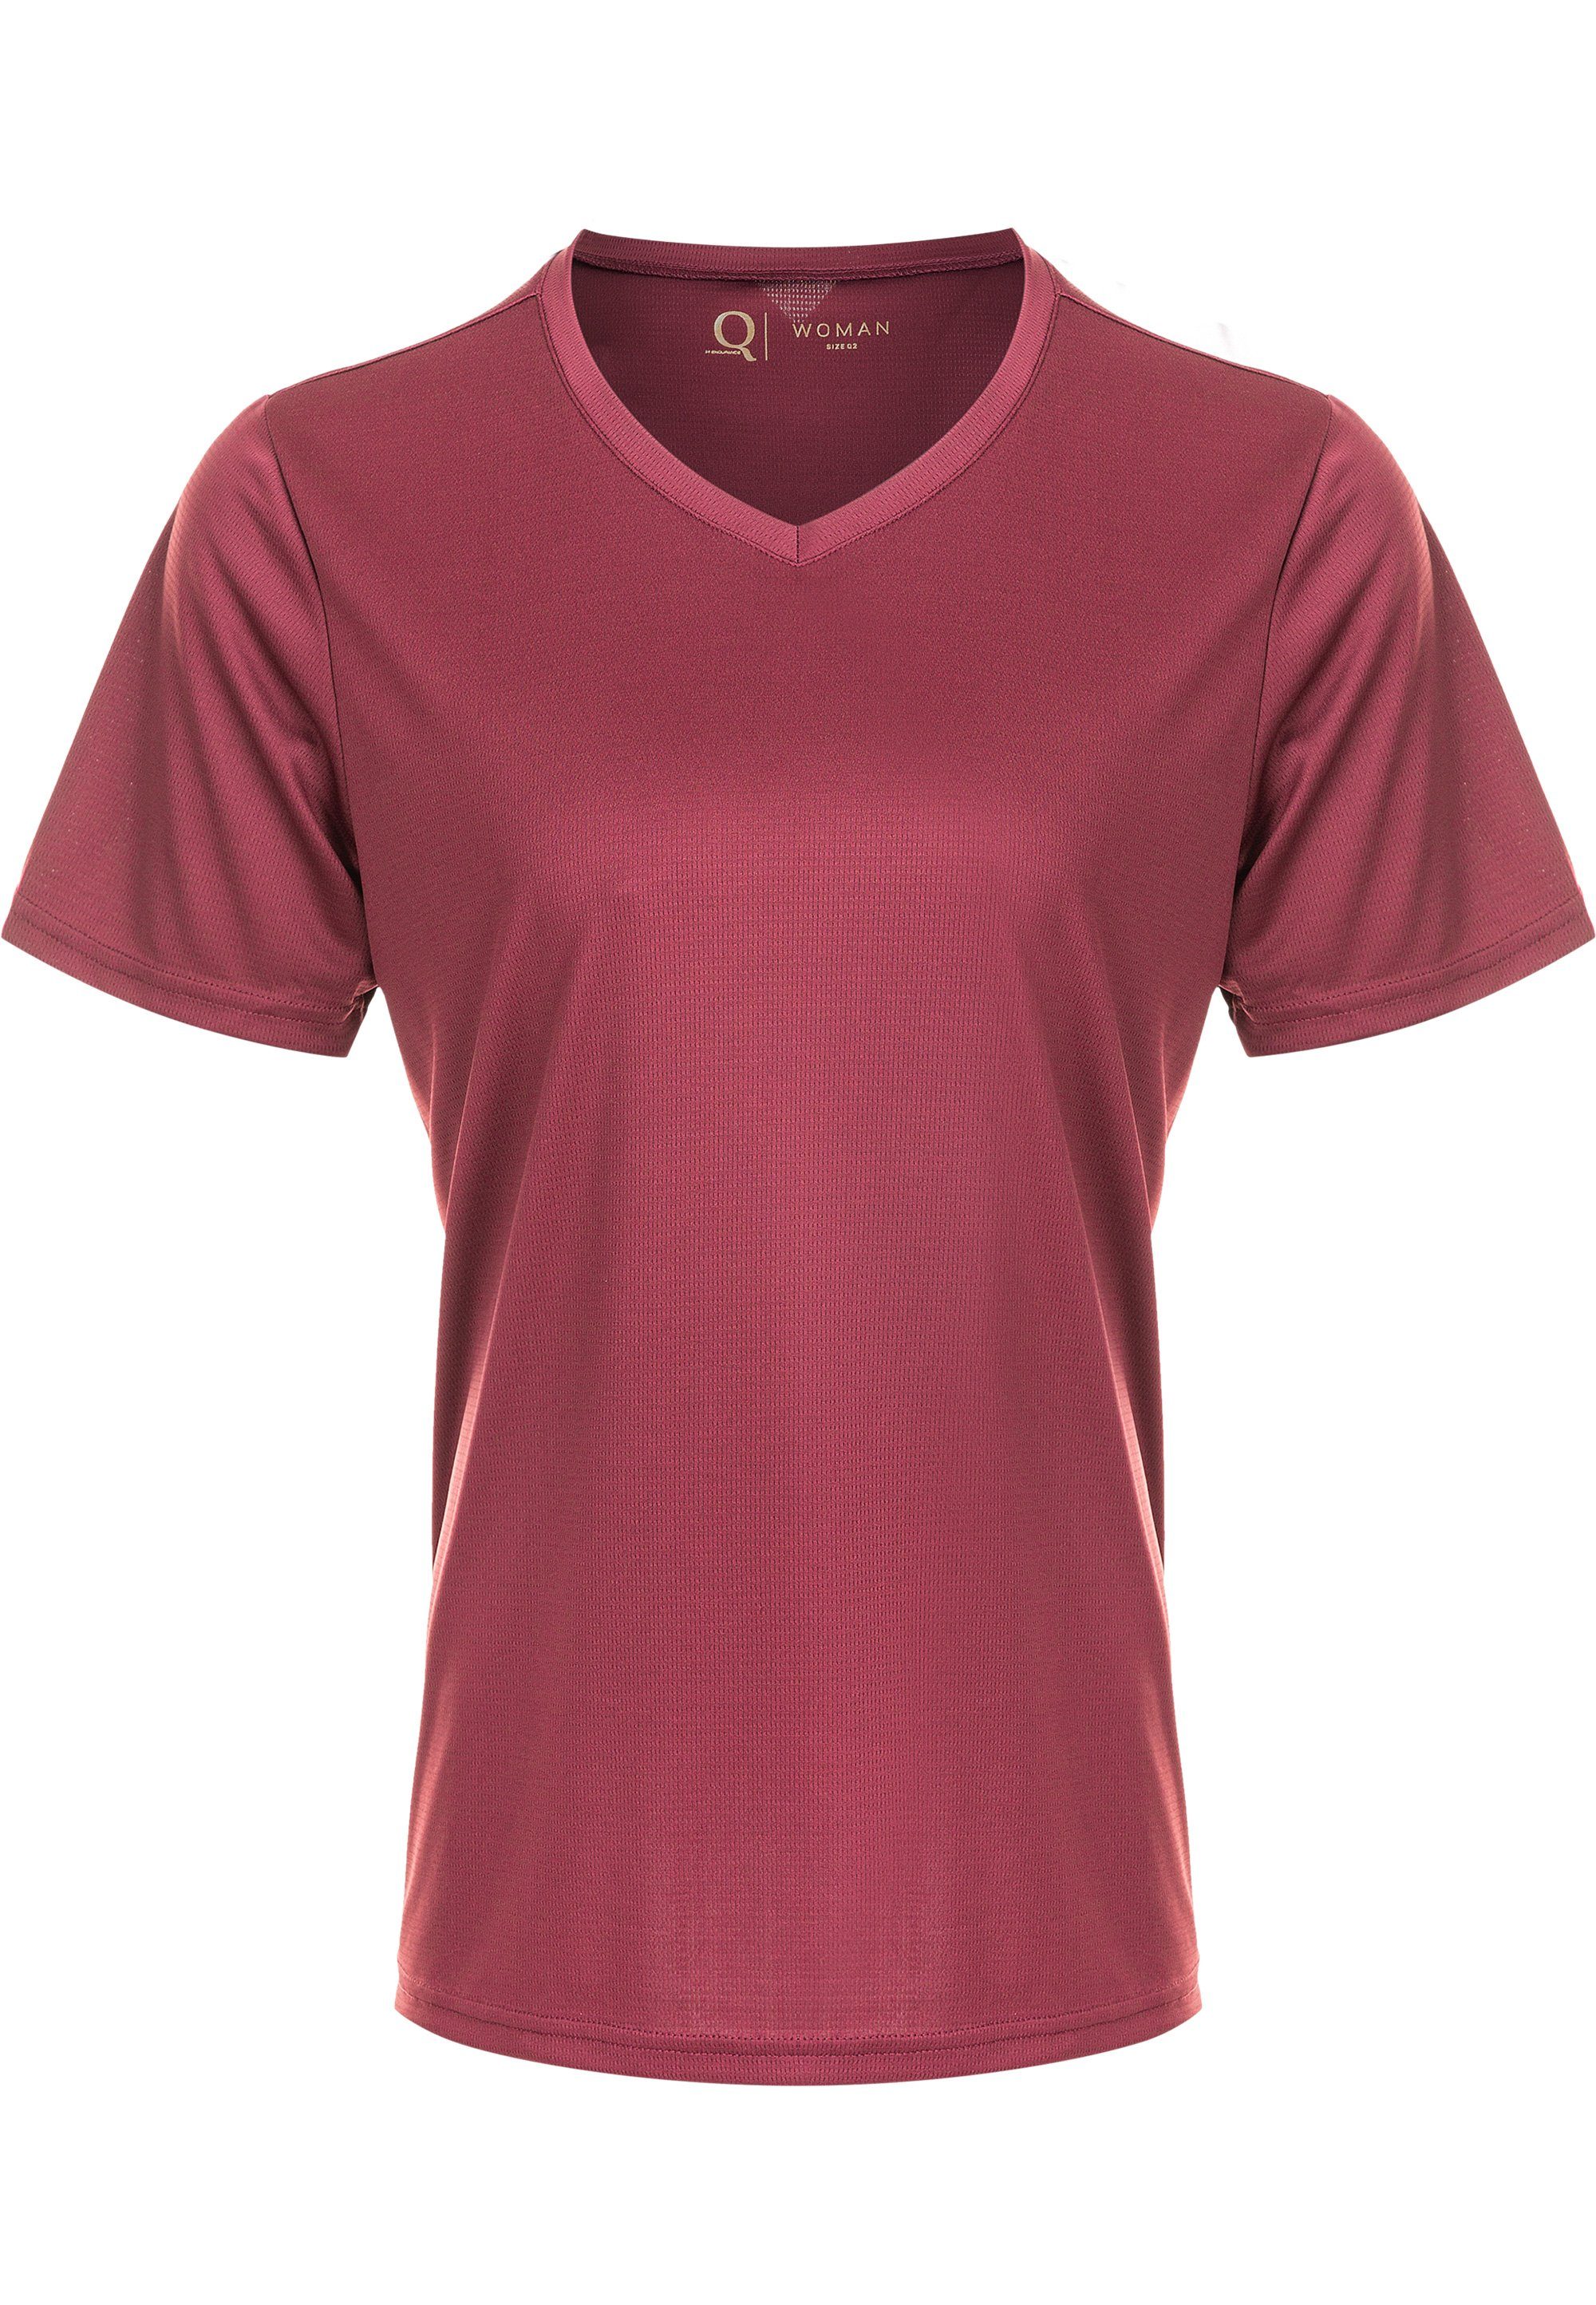 Q by Endurance ANNABELLE QUICK mit DRY-Technologie Funktionsshirt (1-tlg) rot